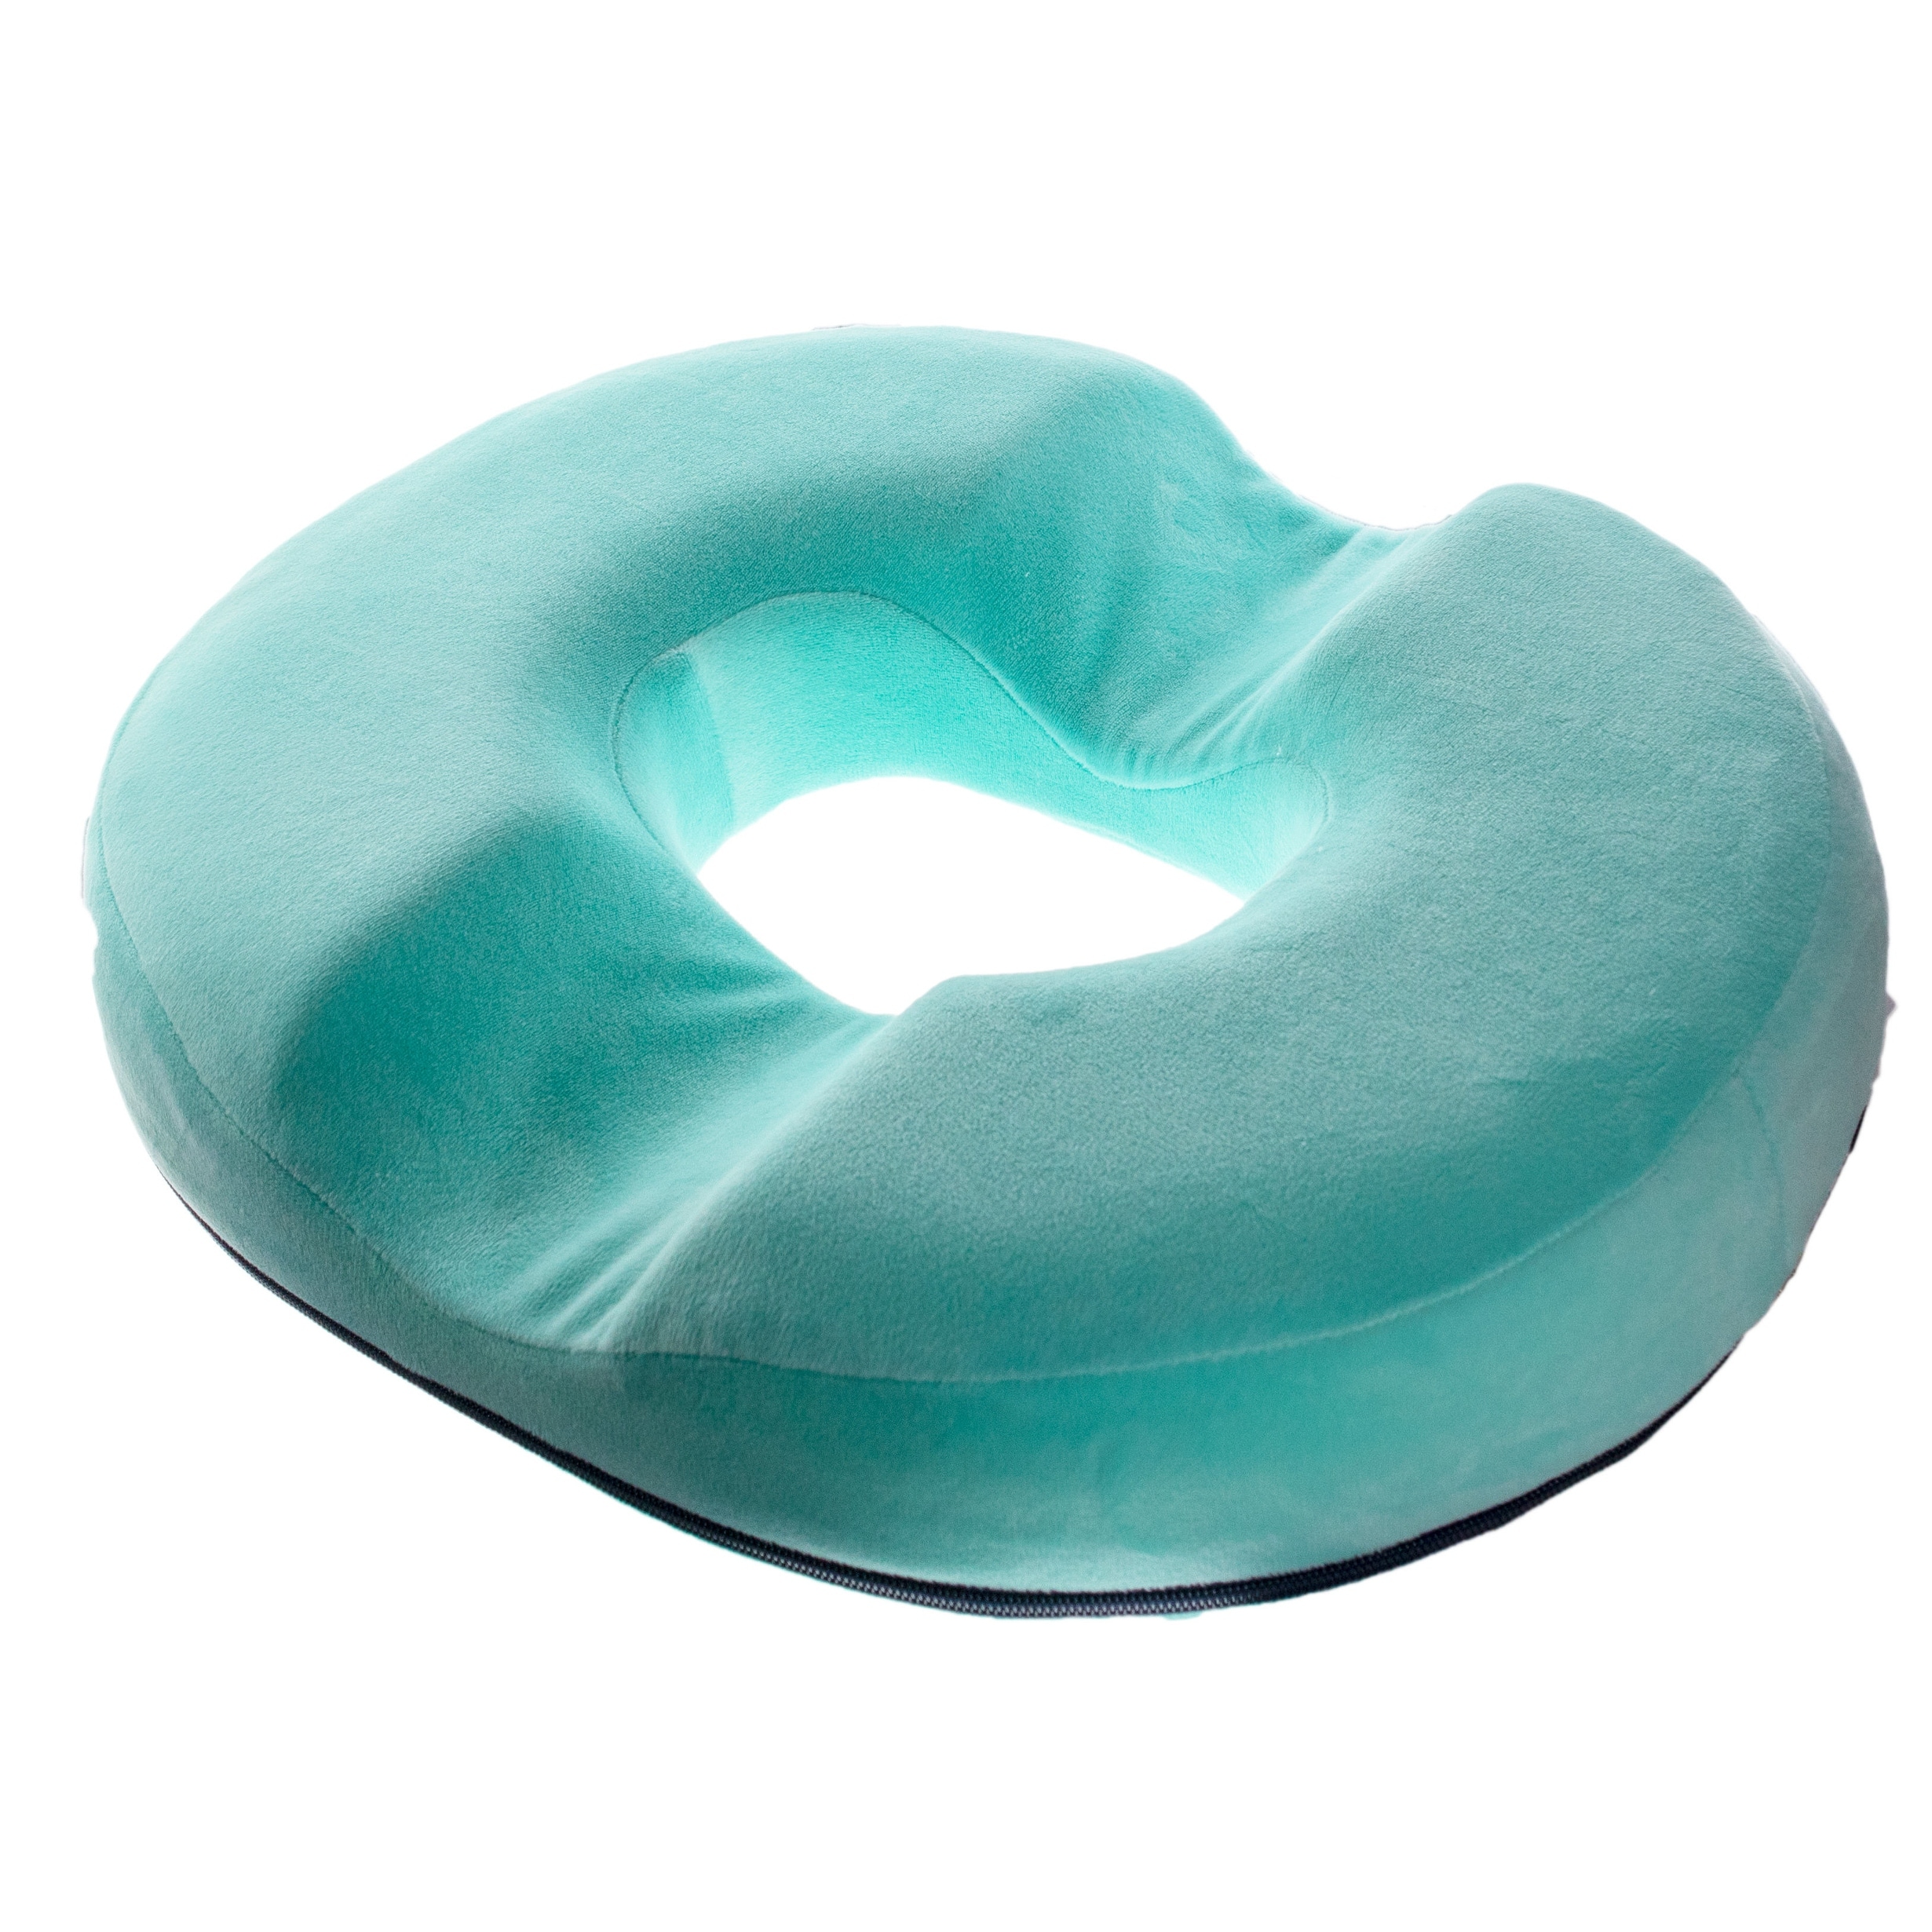 https://ak1.ostkcdn.com/images/products/is/images/direct/b017d77a7d5705f7ba7ec9bd28e8223e104f39a2/Orthopedic-Donut-Seat-Cushion-Memory-Foam-Cushion-Coccyx-Memory-Foam-Pillow.jpg